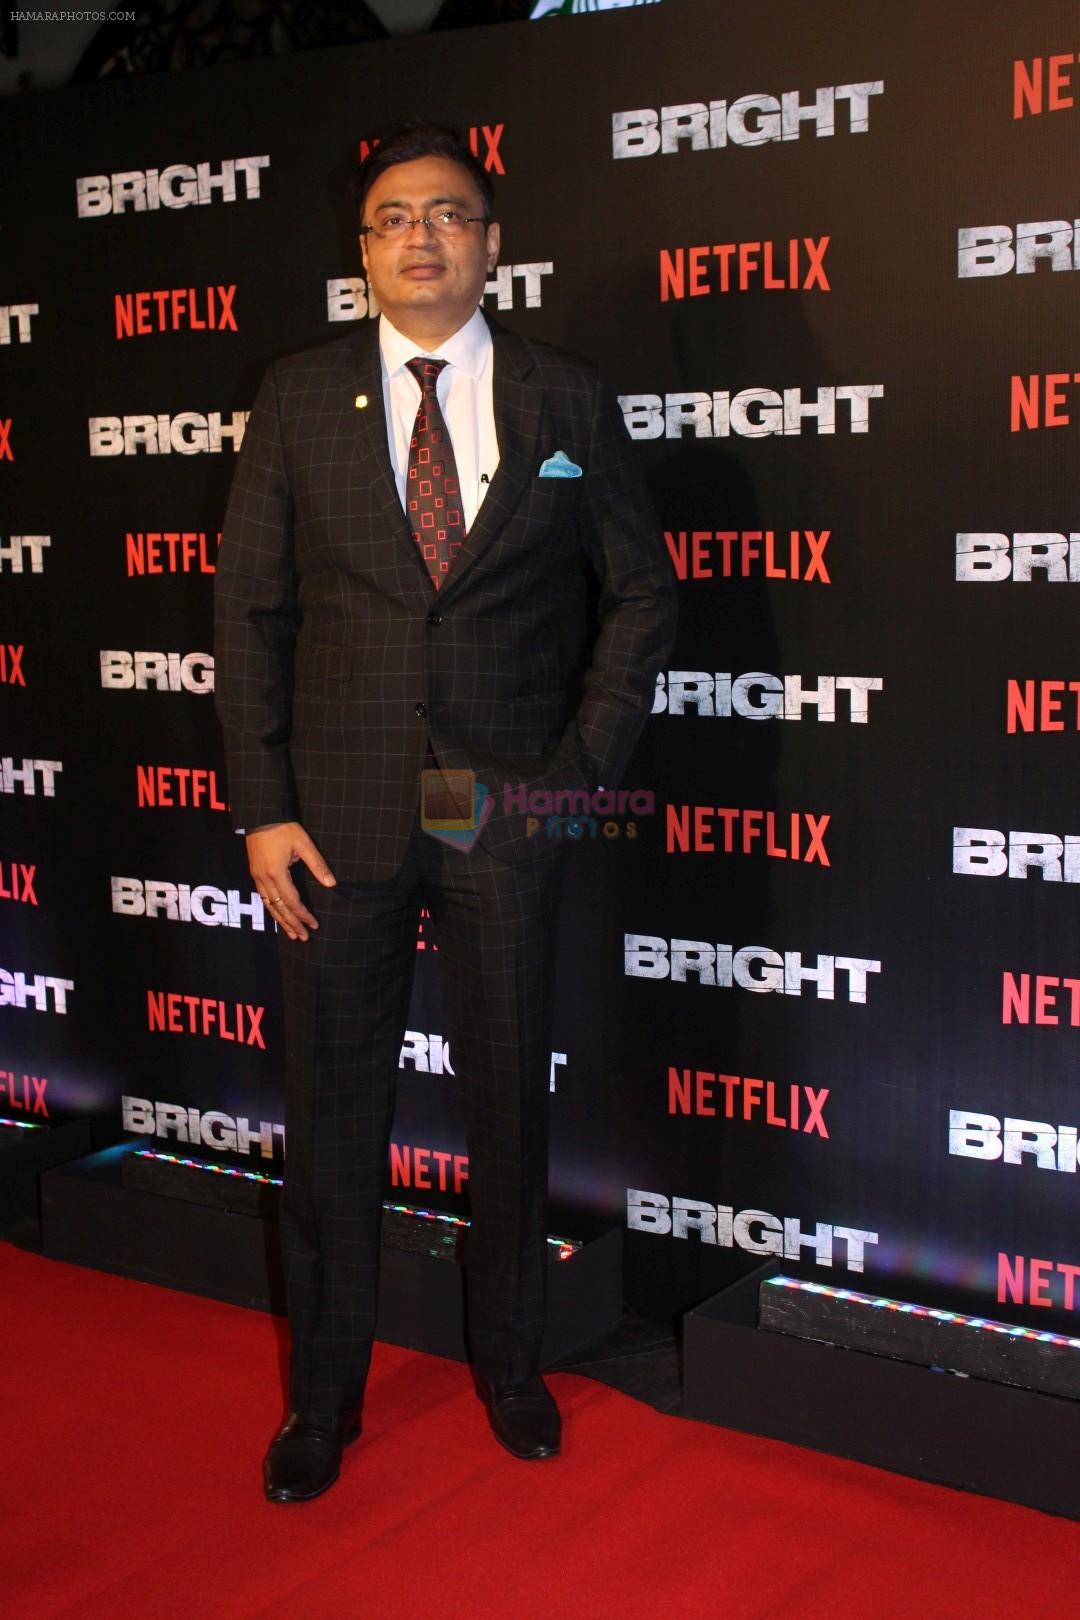 At the Red Carpet Of Netflix Original Bright on 18th Dec 2017